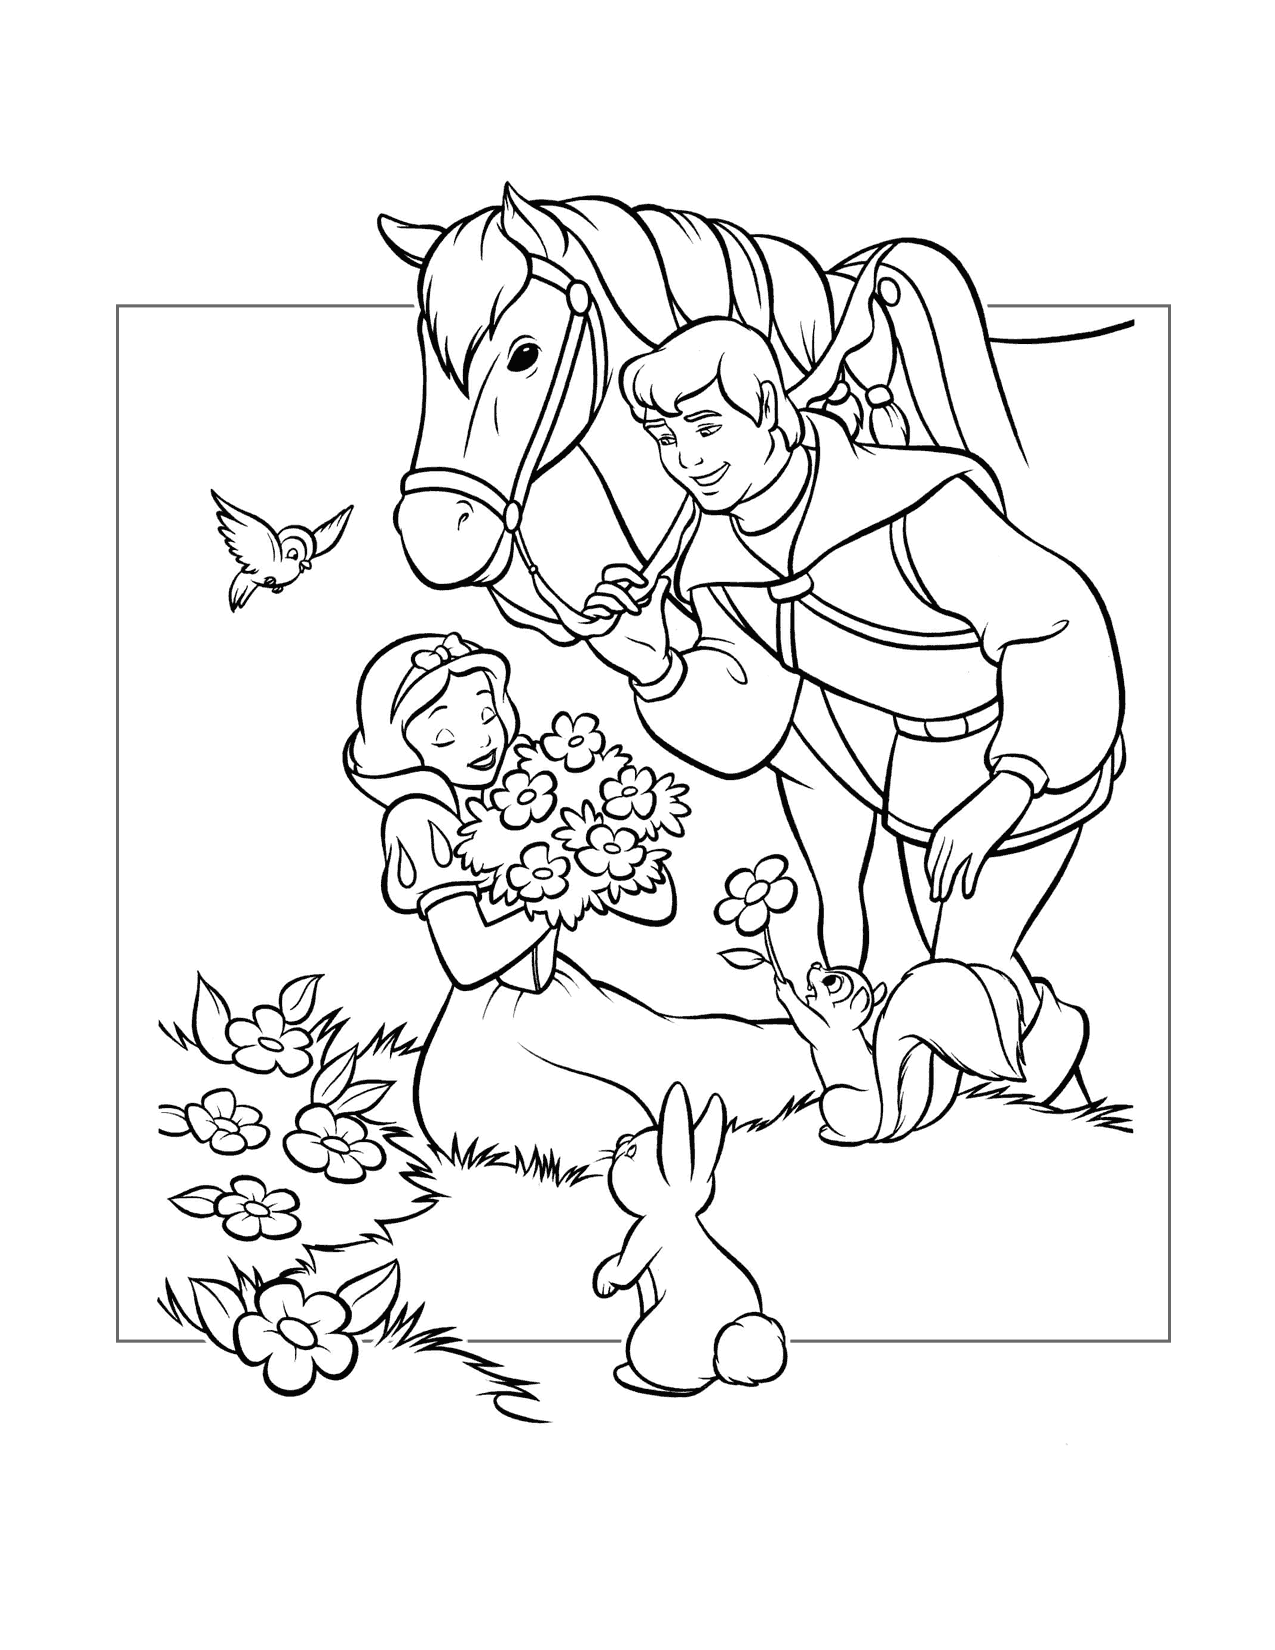 Snow White Picks Flowers Coloring Page